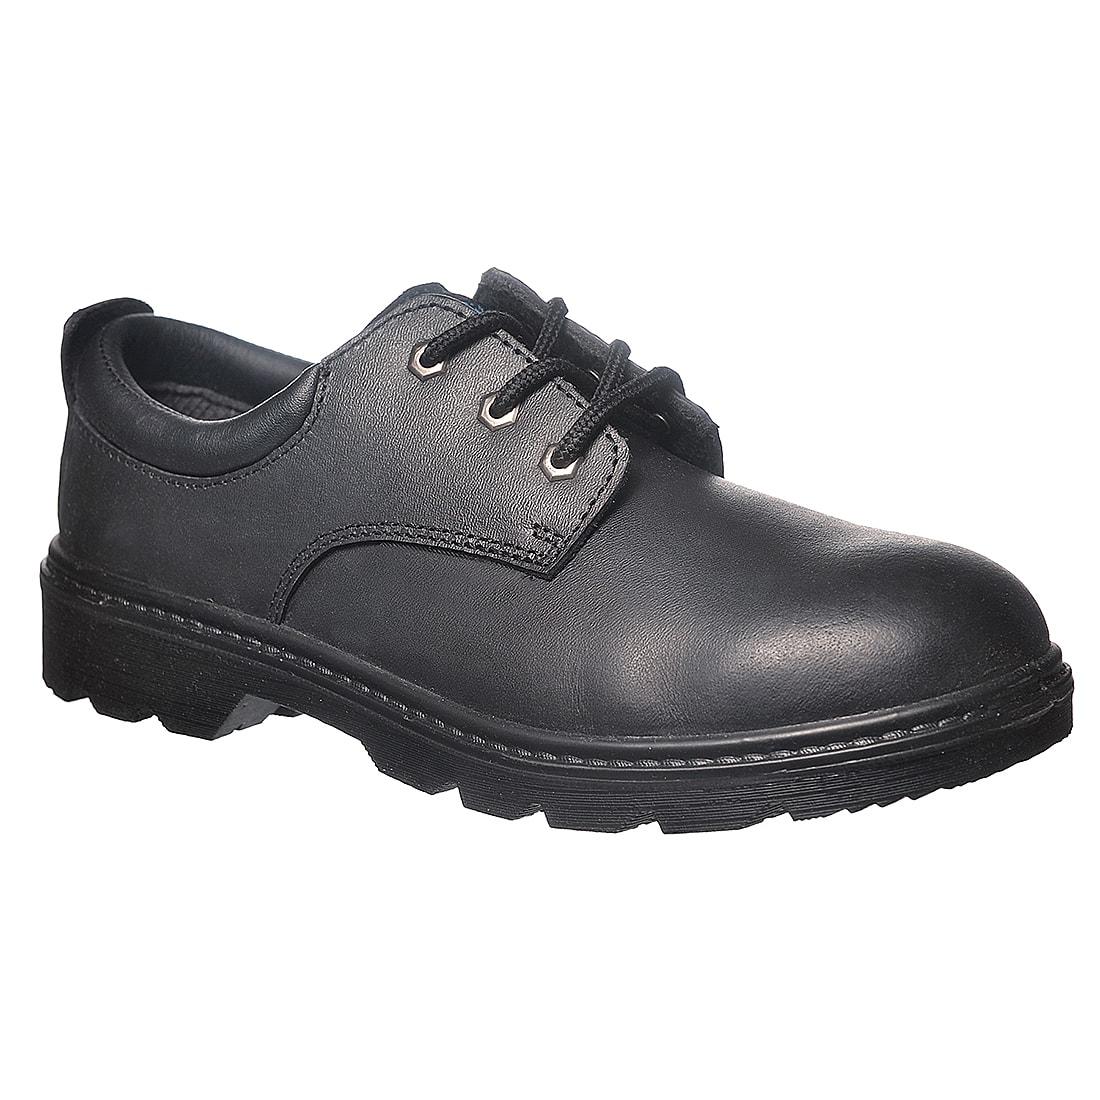 Portwest Steelite Thor Shoes S3 in Black (Product Code: FW44)